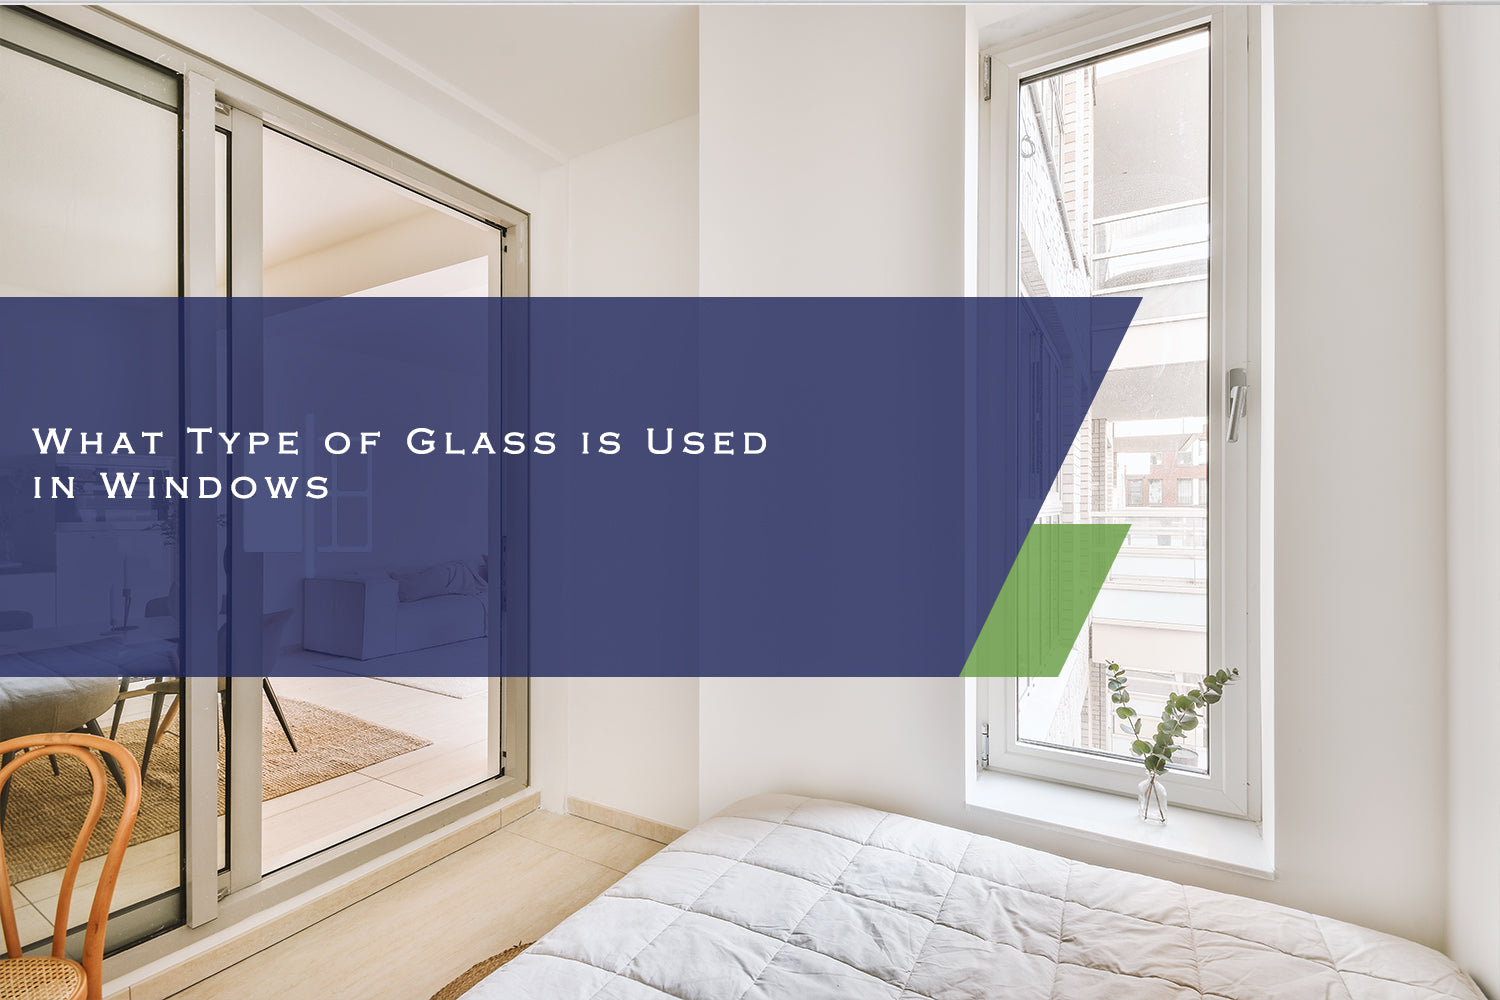 What Type of Glass is Used in Windows?